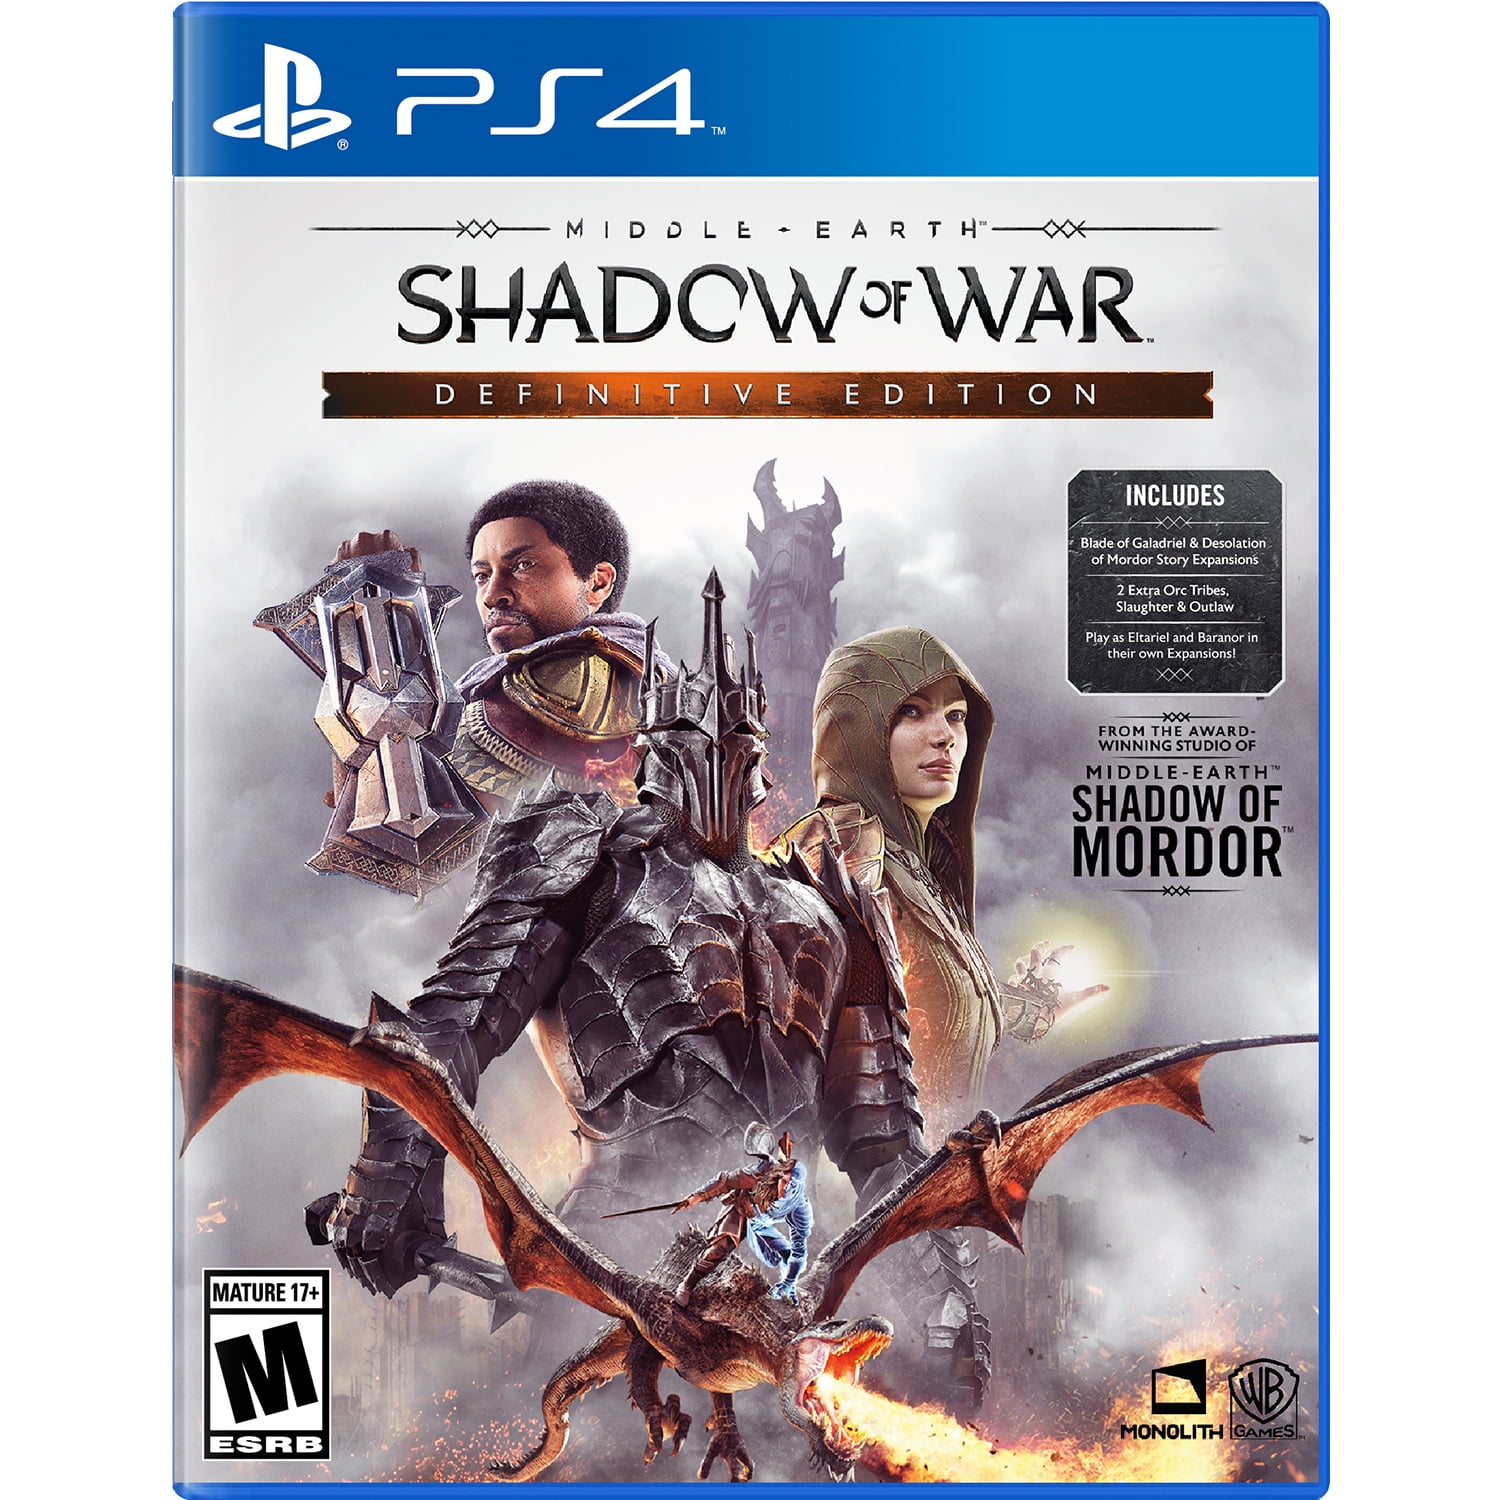 Middle-earth: Shadow of Mordor - PlayStation 3, PlayStation 3